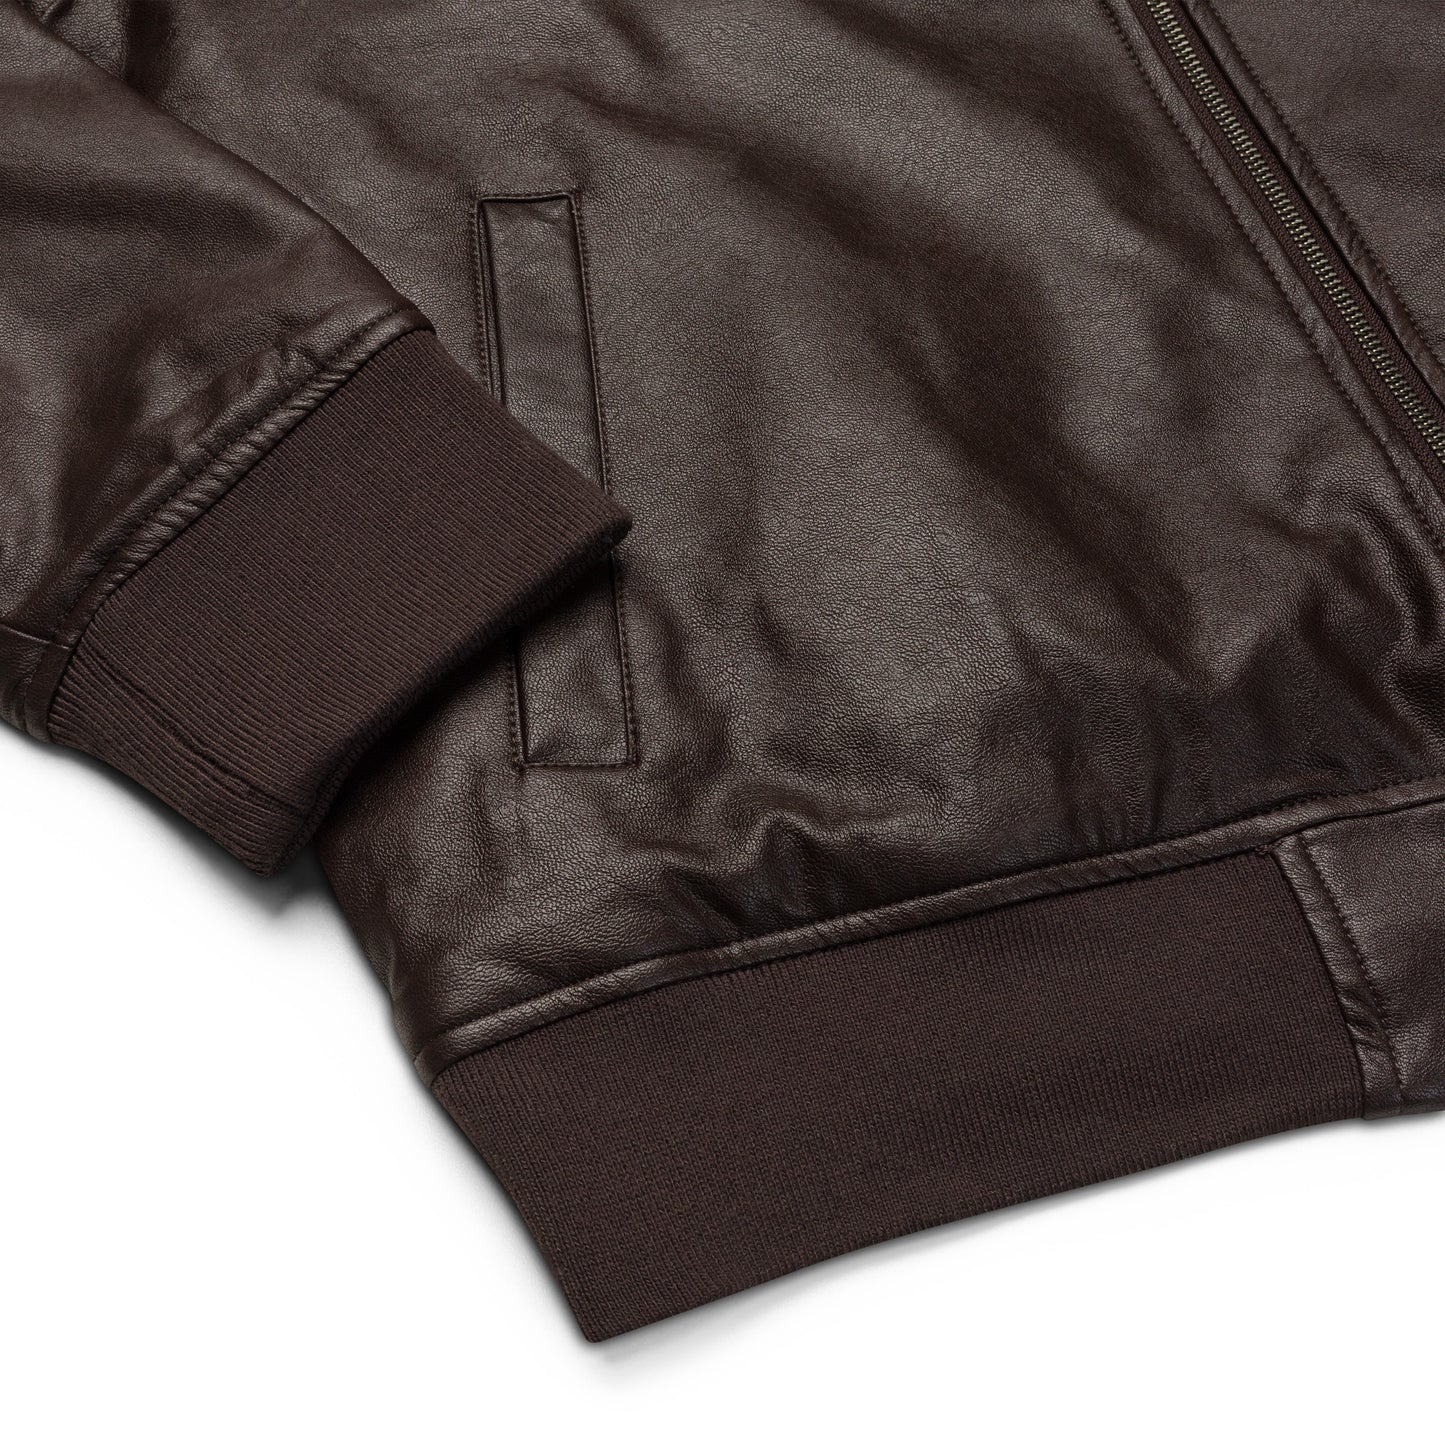 [Between the Lines] Leather Bomber Jacket